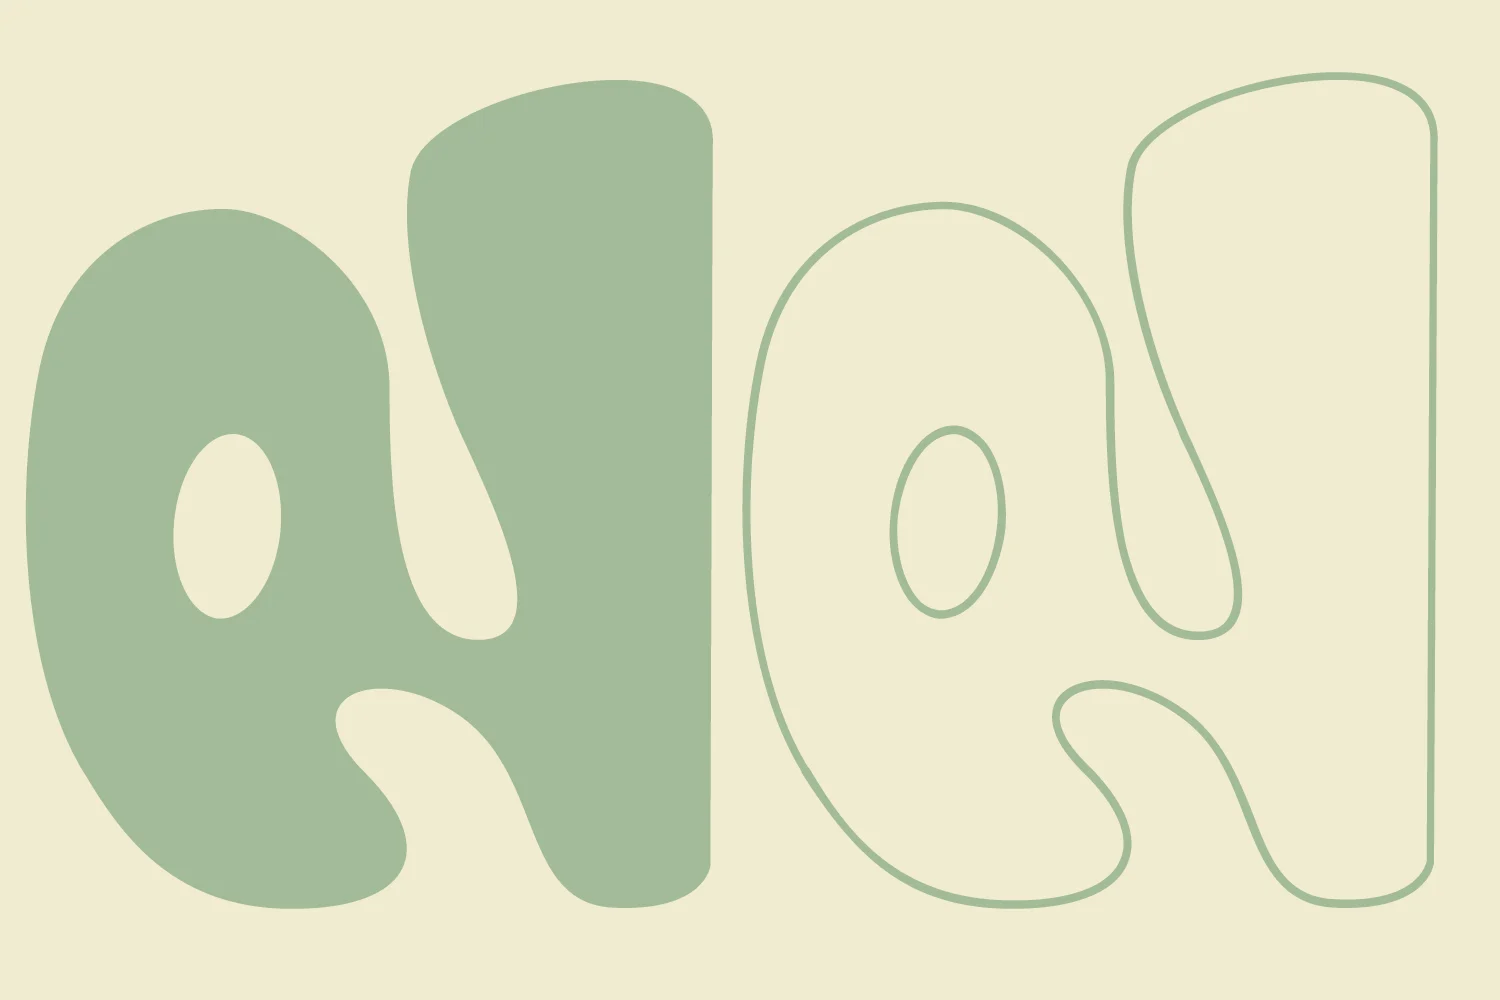 Gromer Font - graphic for free